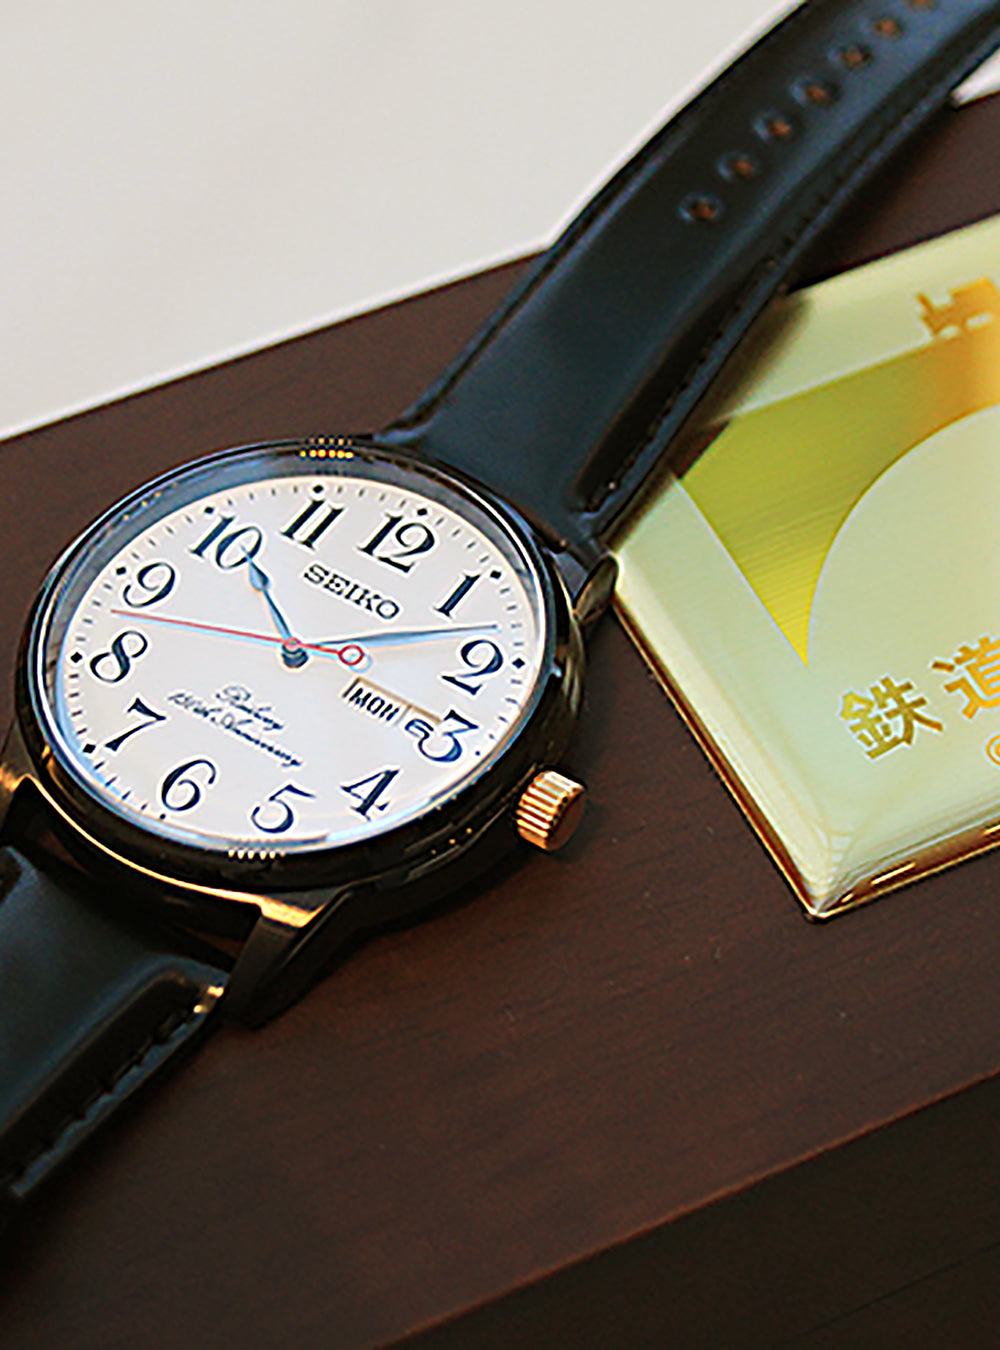 SEIKO × RAILWAY 150TH ANNIVERSARY LIMITED EDITION MADE IN JAPAN